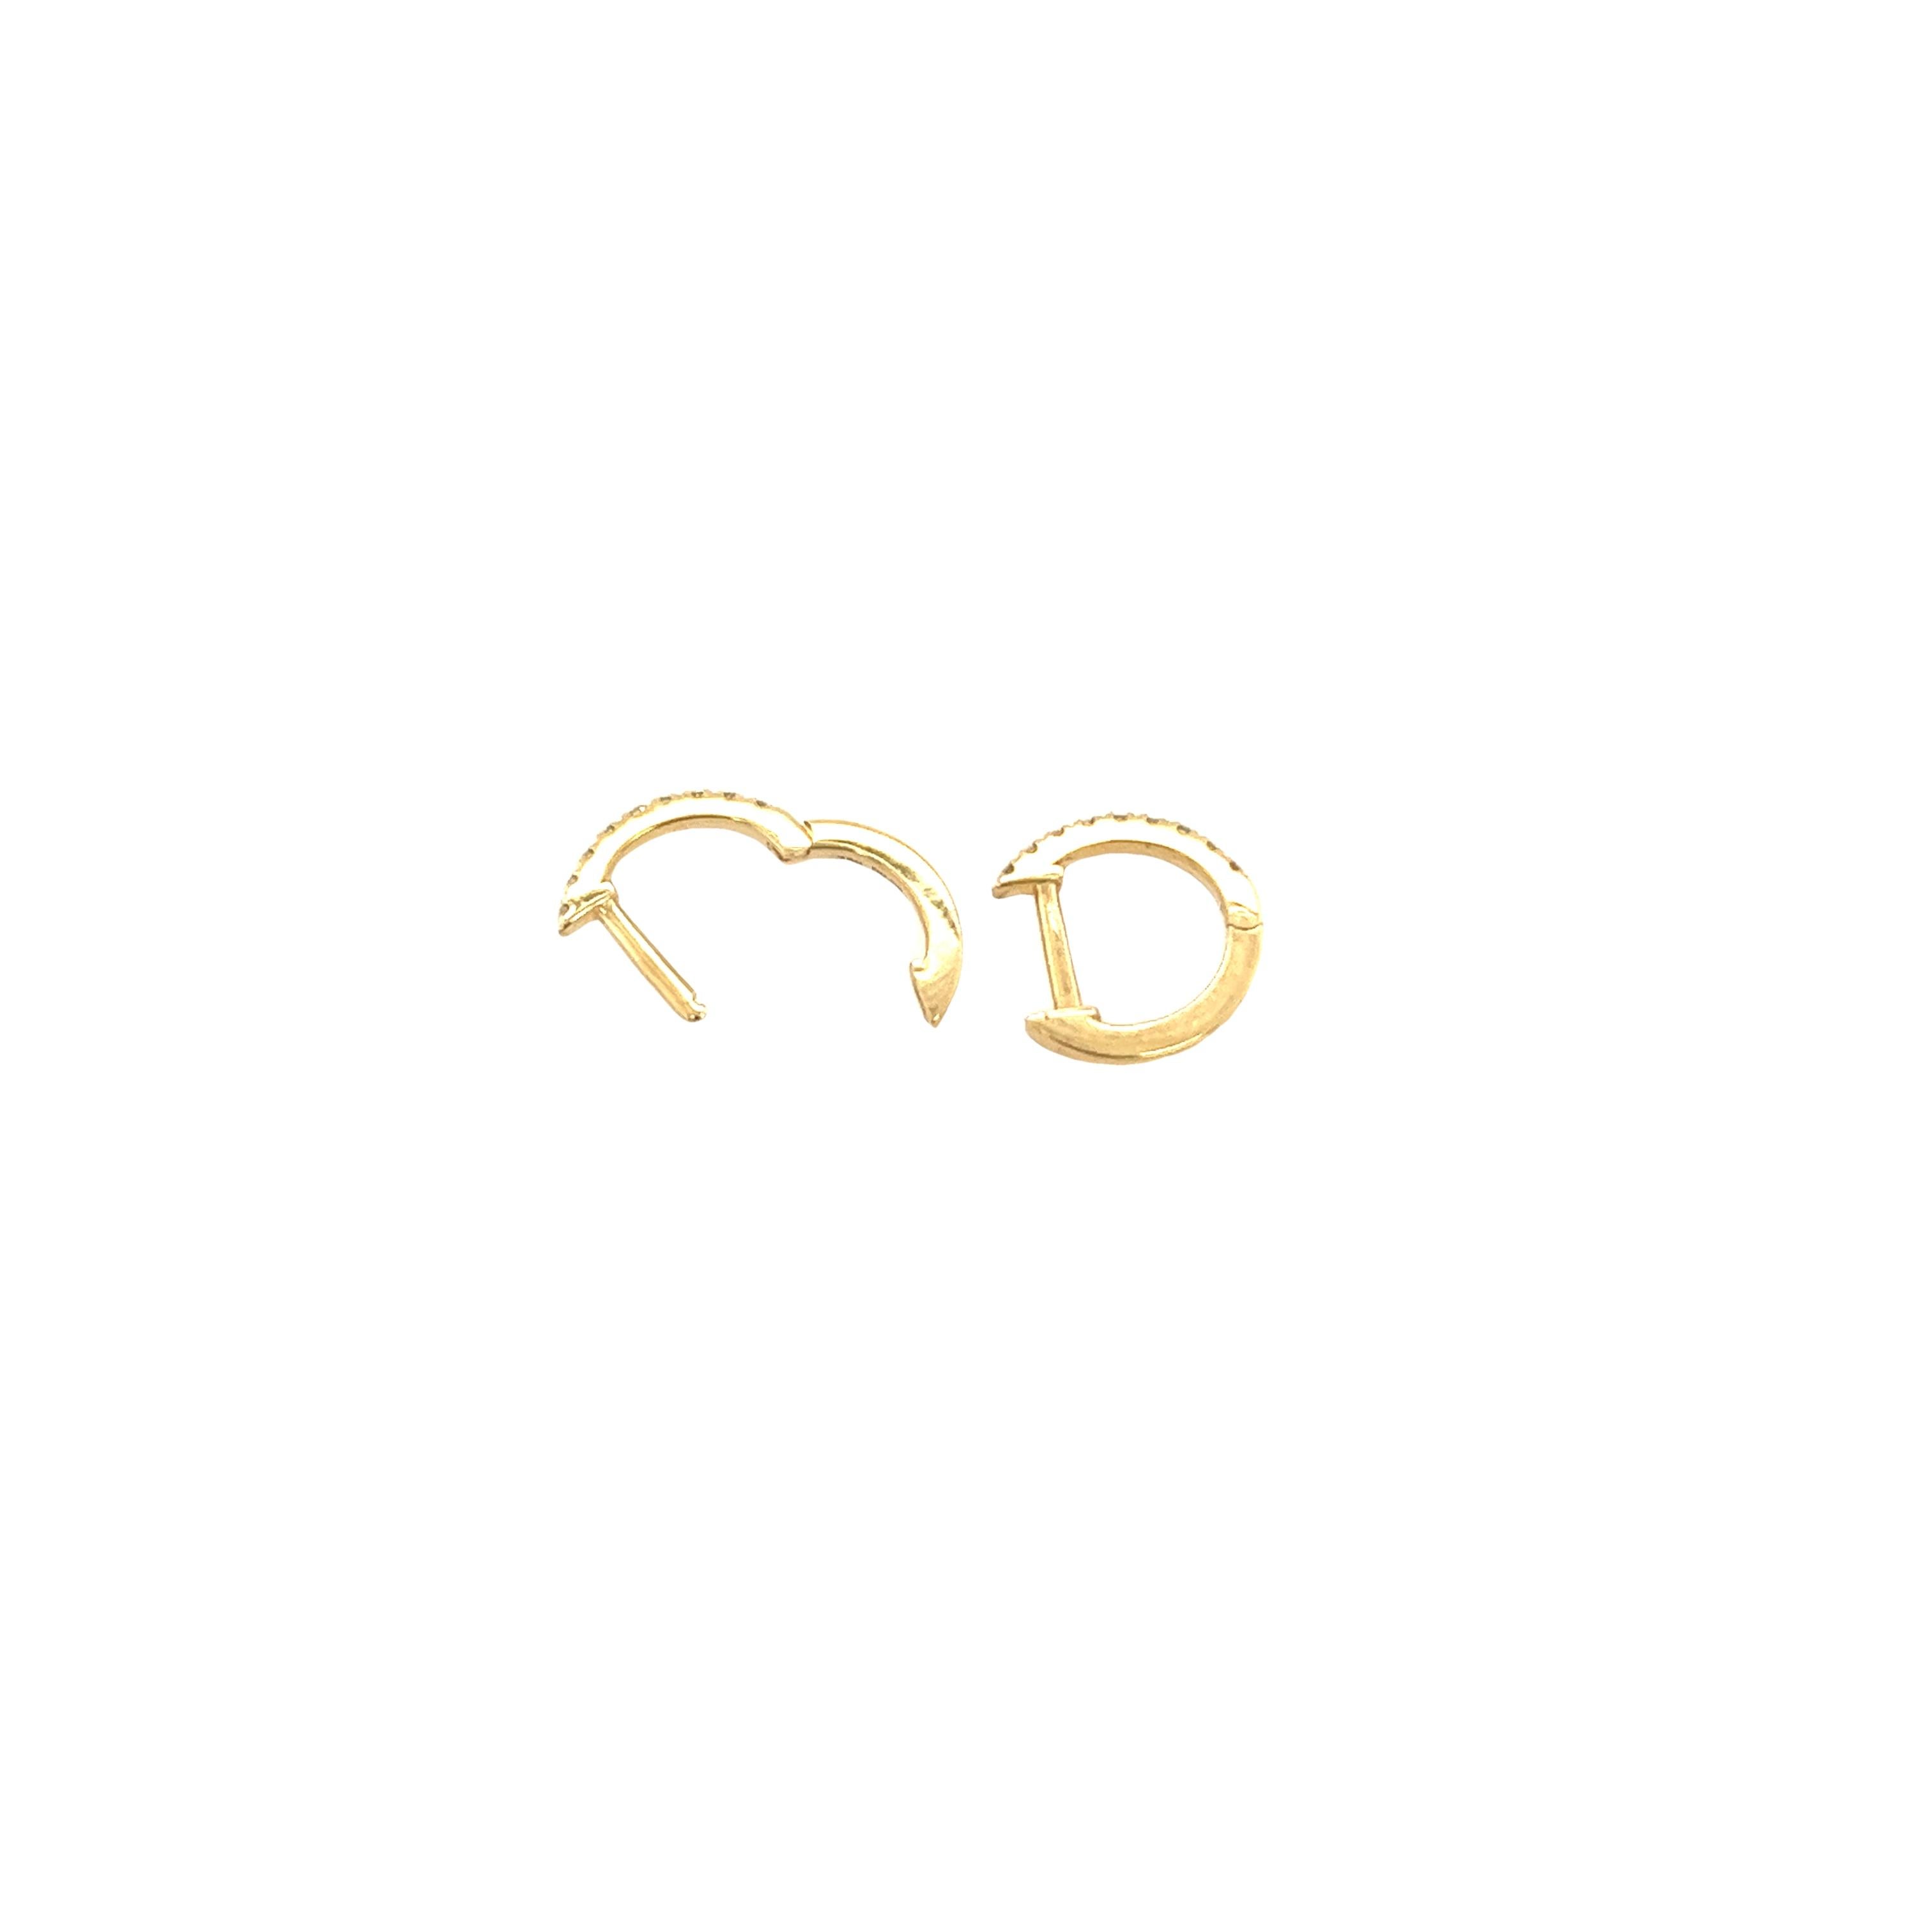 18ct Yellow Gold Diamond Hoop Earrings, Set With 0.08ct Of Round Diamonds, 9mm In New Condition For Sale In London, GB